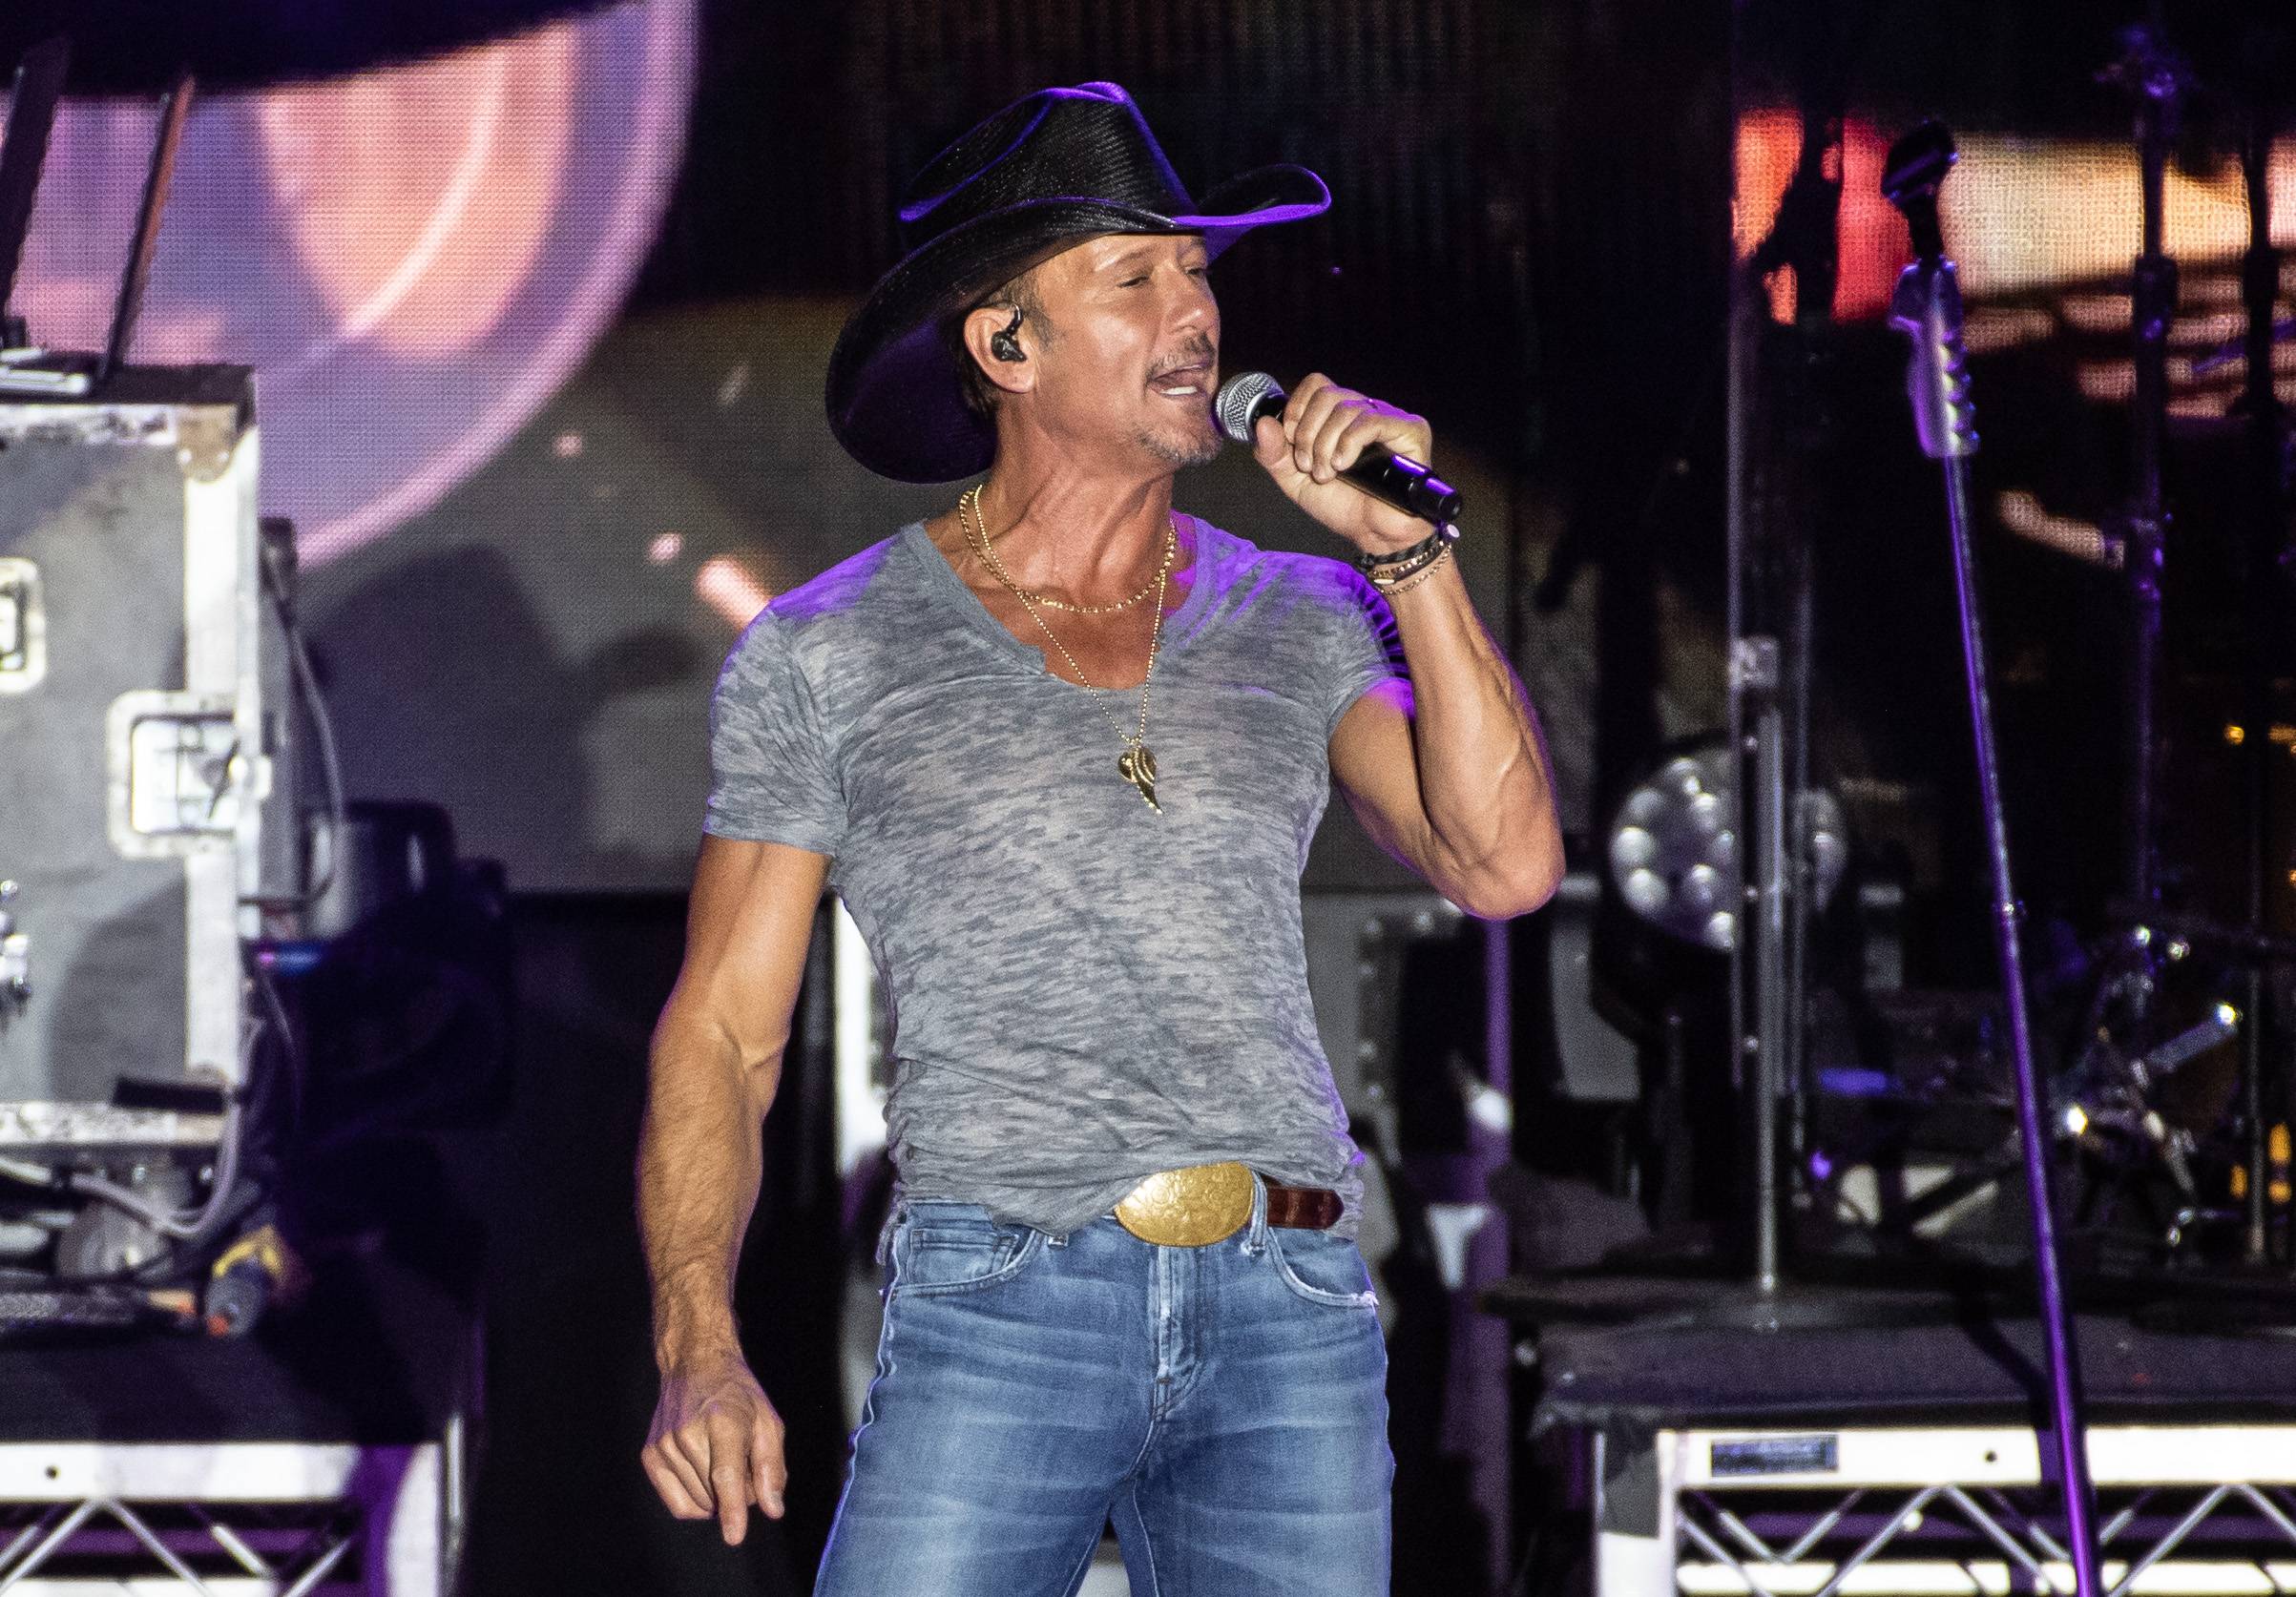 Tim McGraw, Biography, Songs, Movies, & Facts